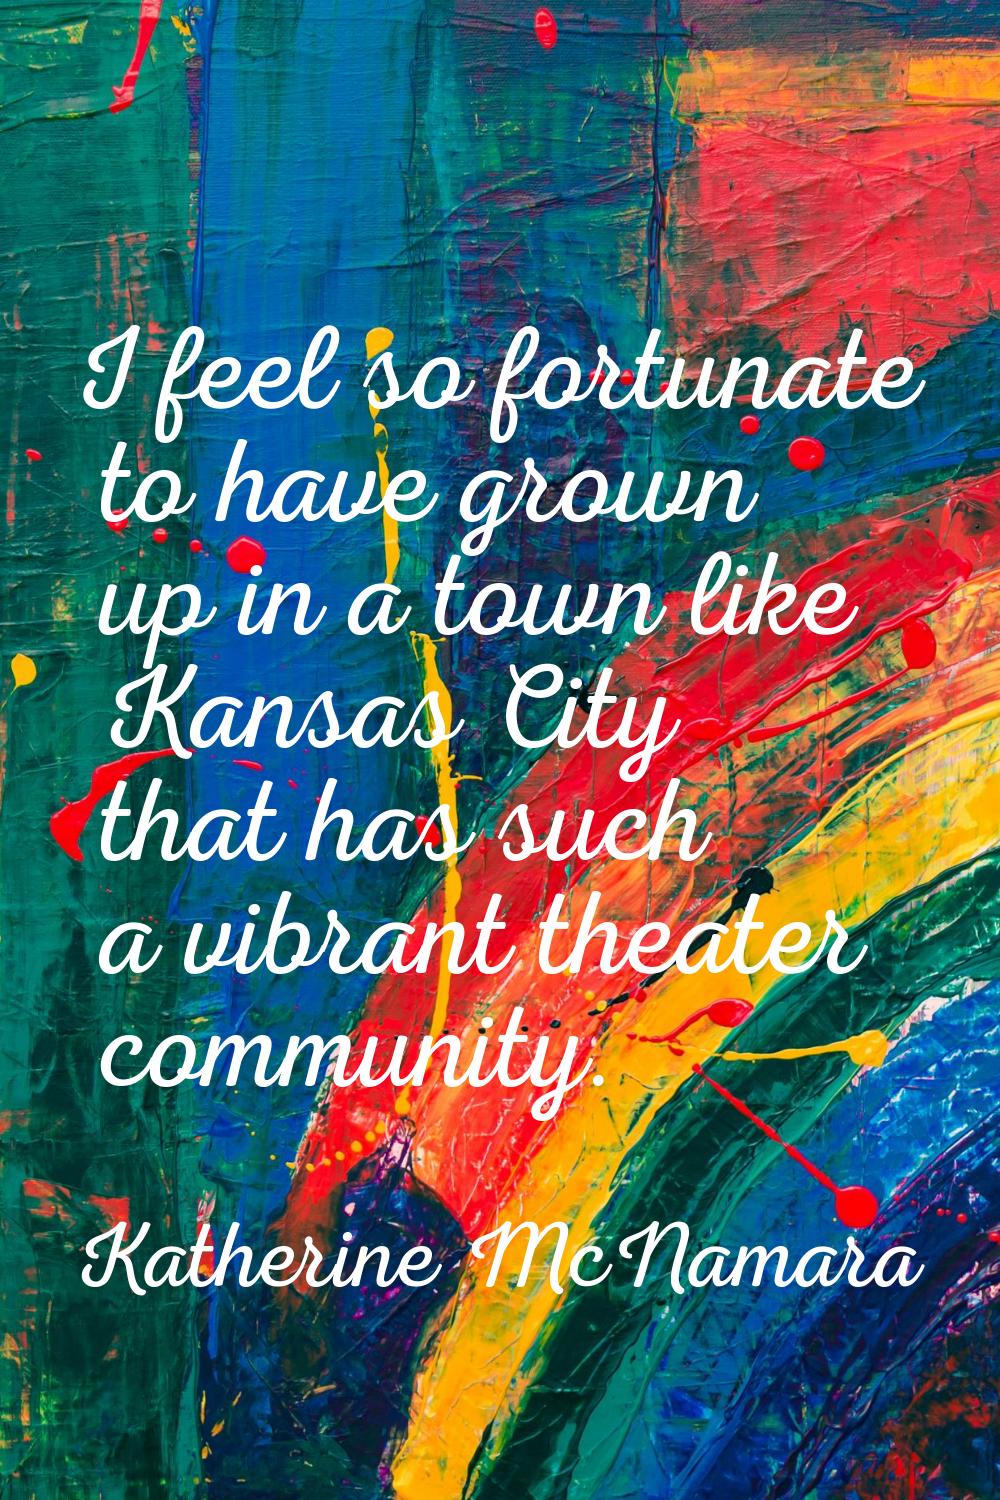 I feel so fortunate to have grown up in a town like Kansas City that has such a vibrant theater com